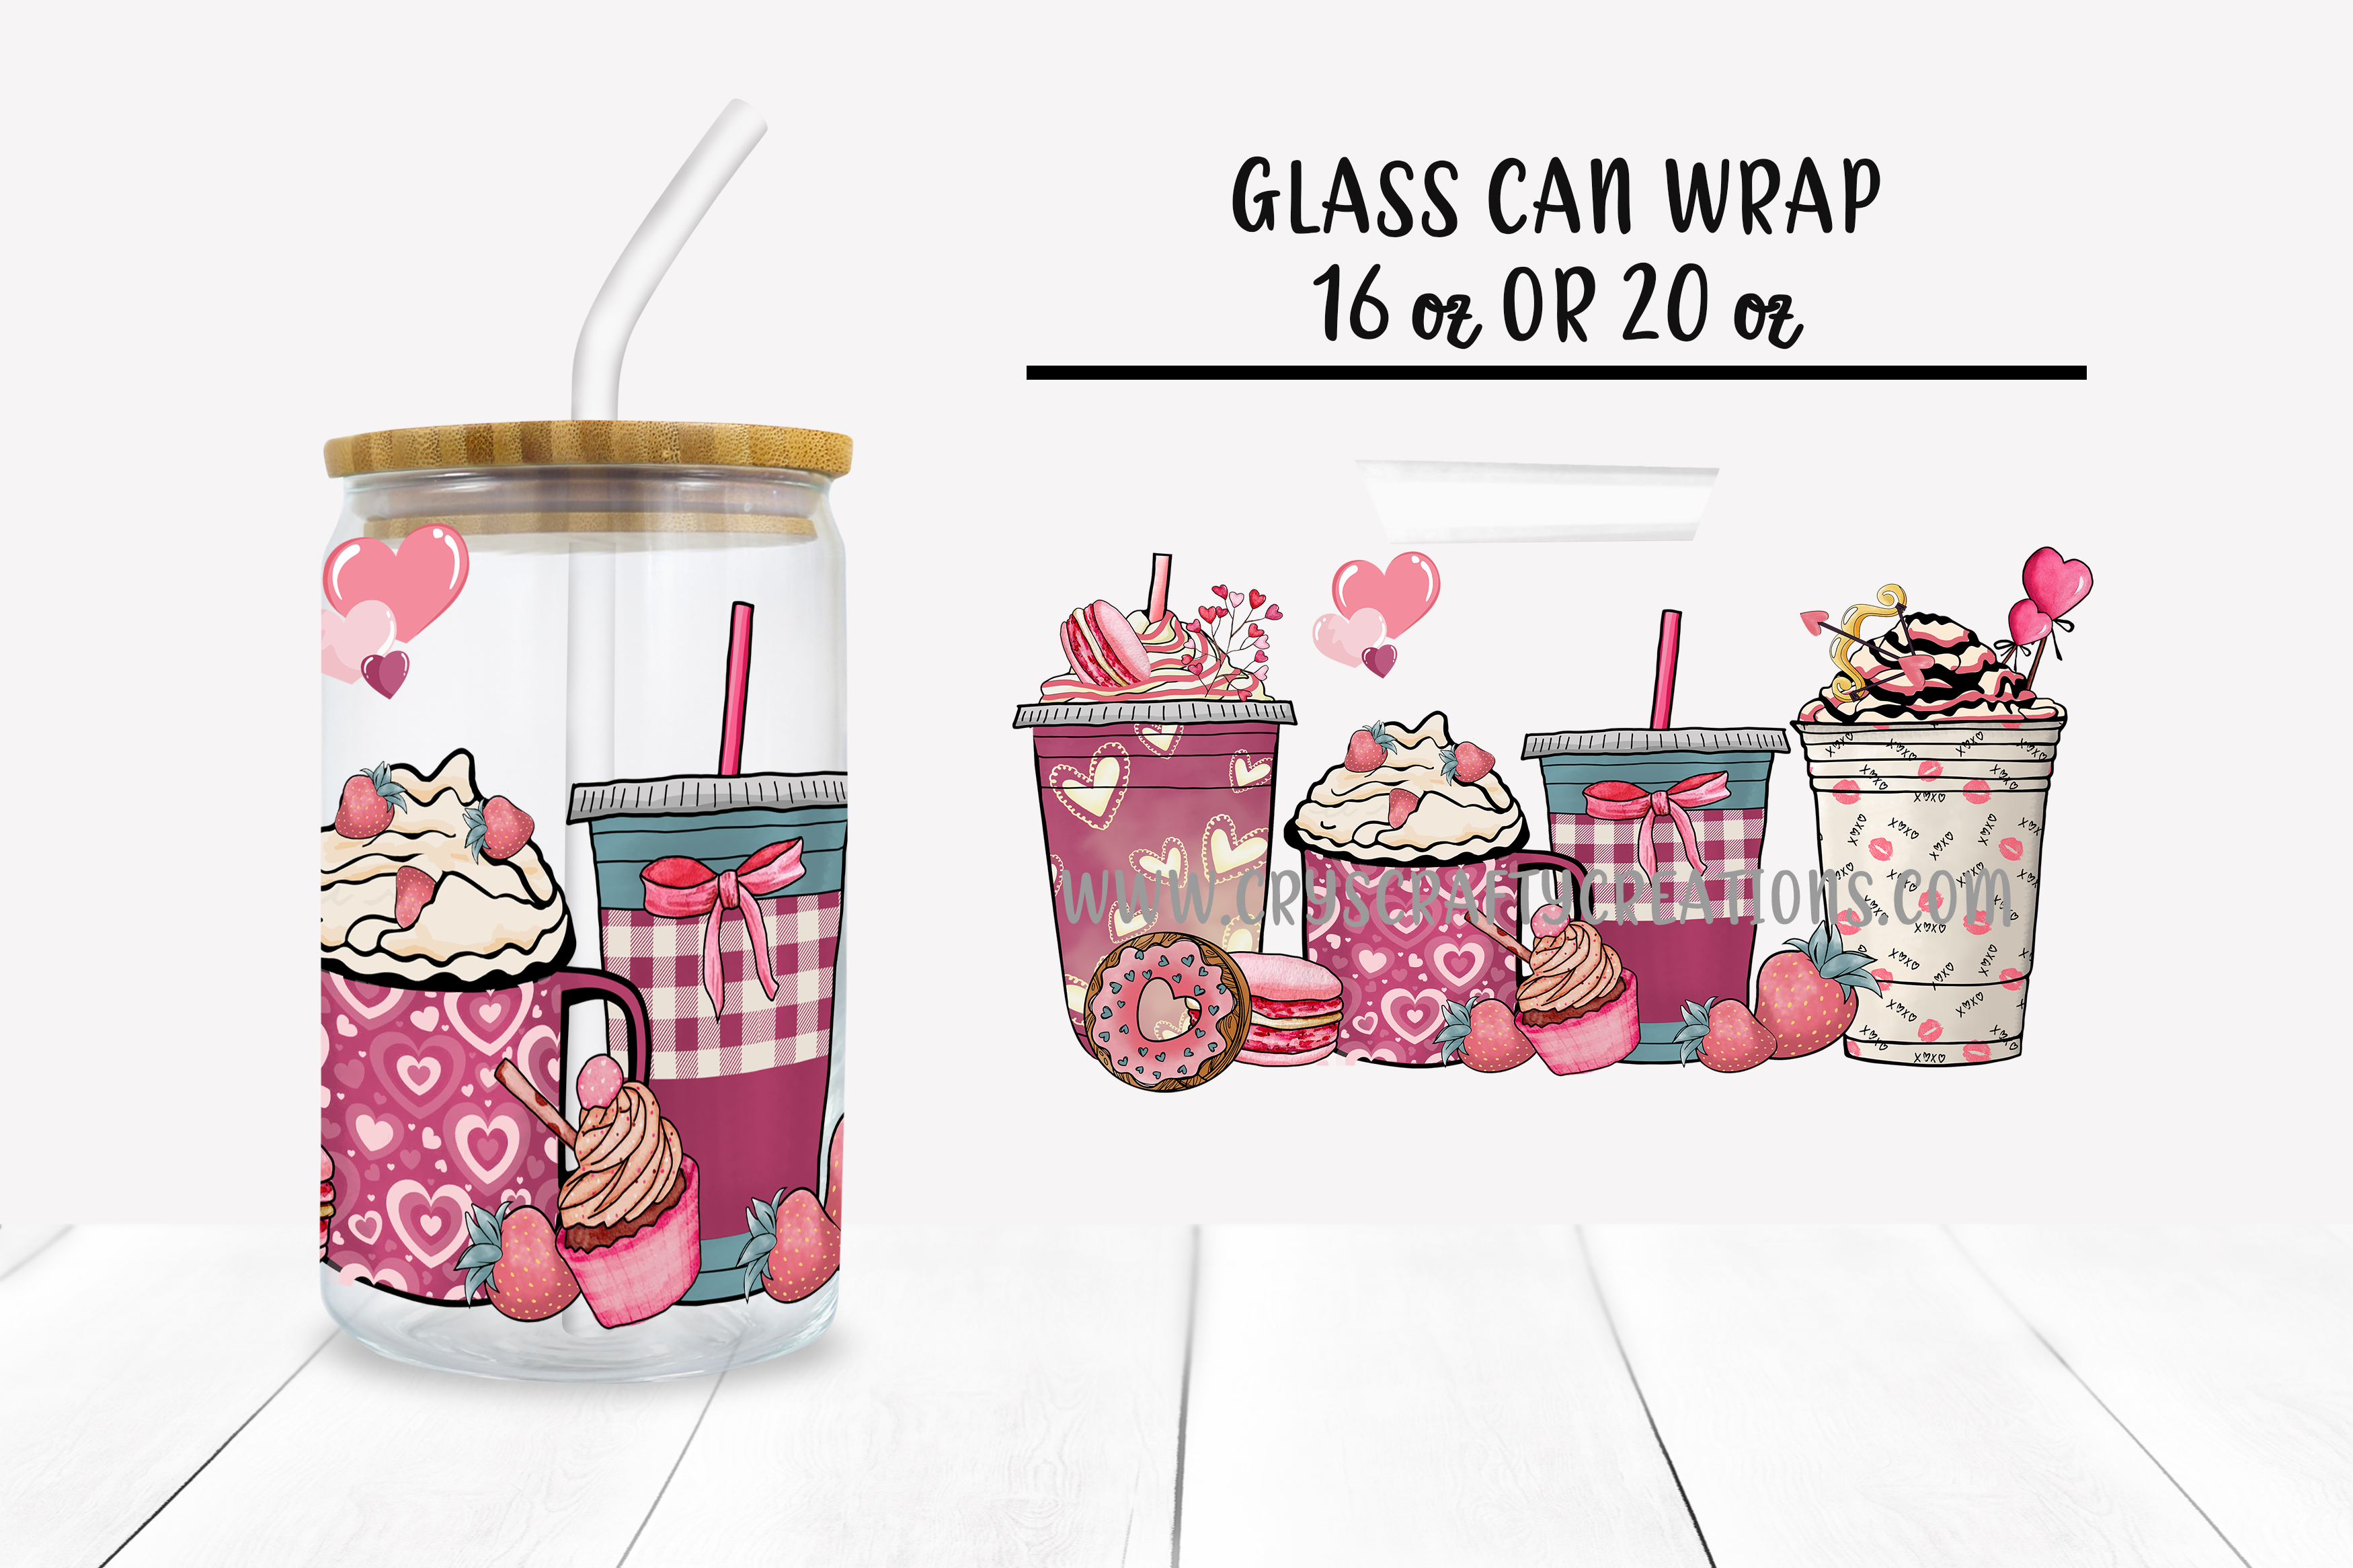 Lots of Hearts for a 24oz Starbucks Cold Cup Vinyl Sticker Wrap